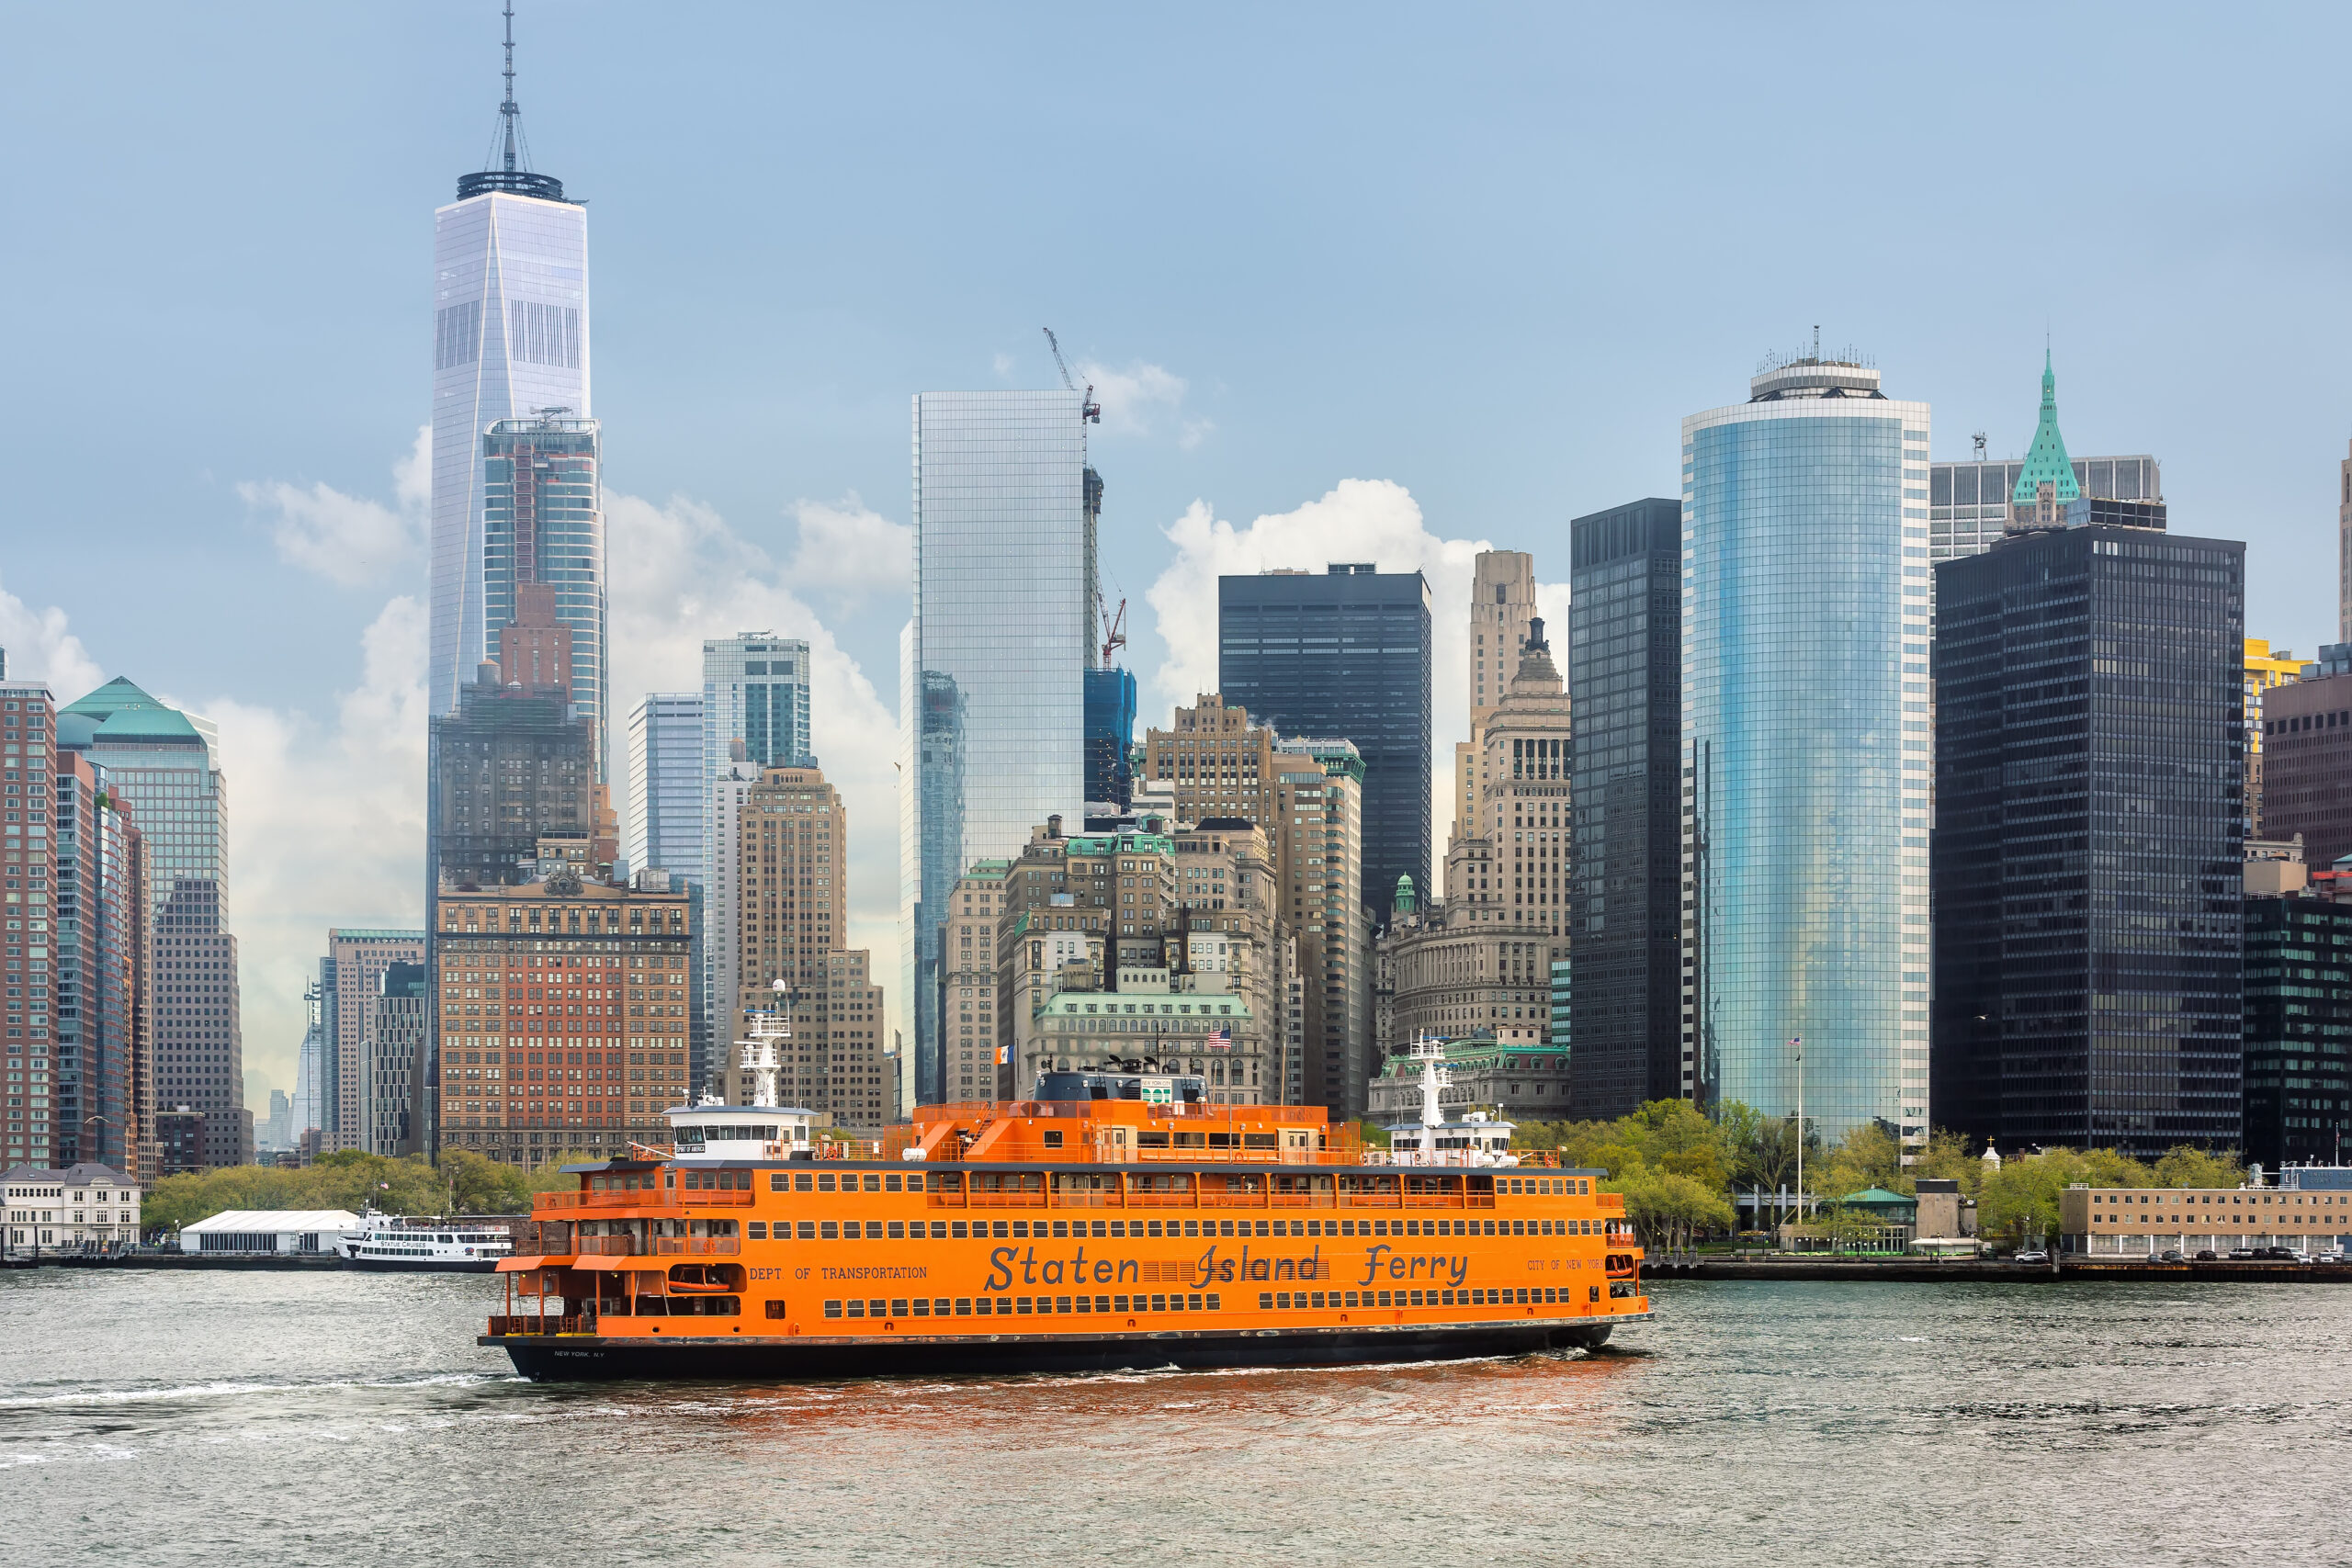 Staten Island Ferry workers reach contract deal after 13 years